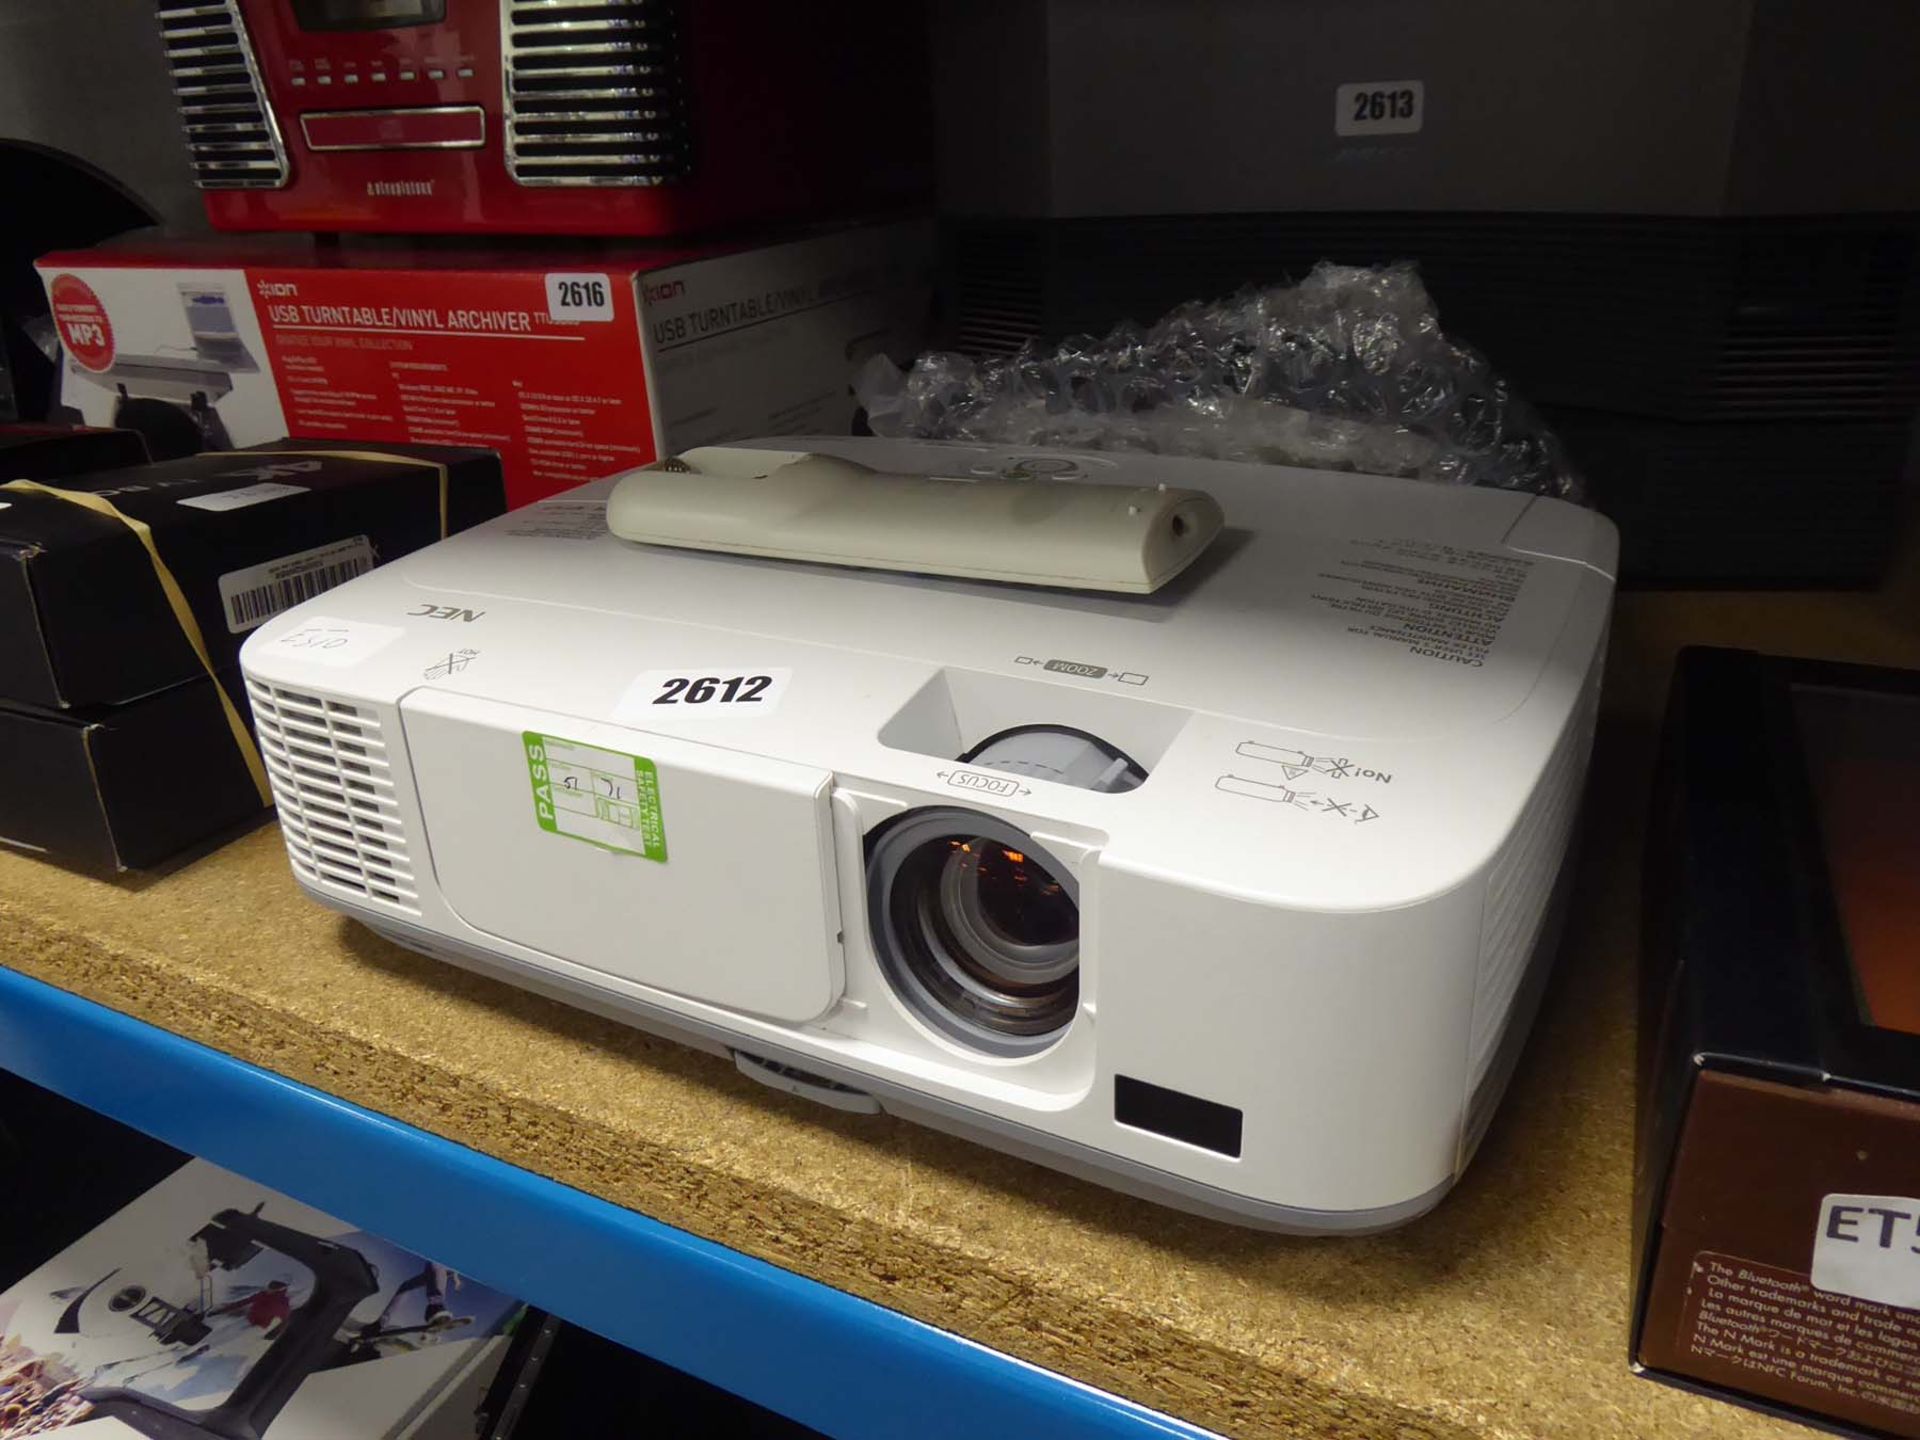 NEC projector with remote